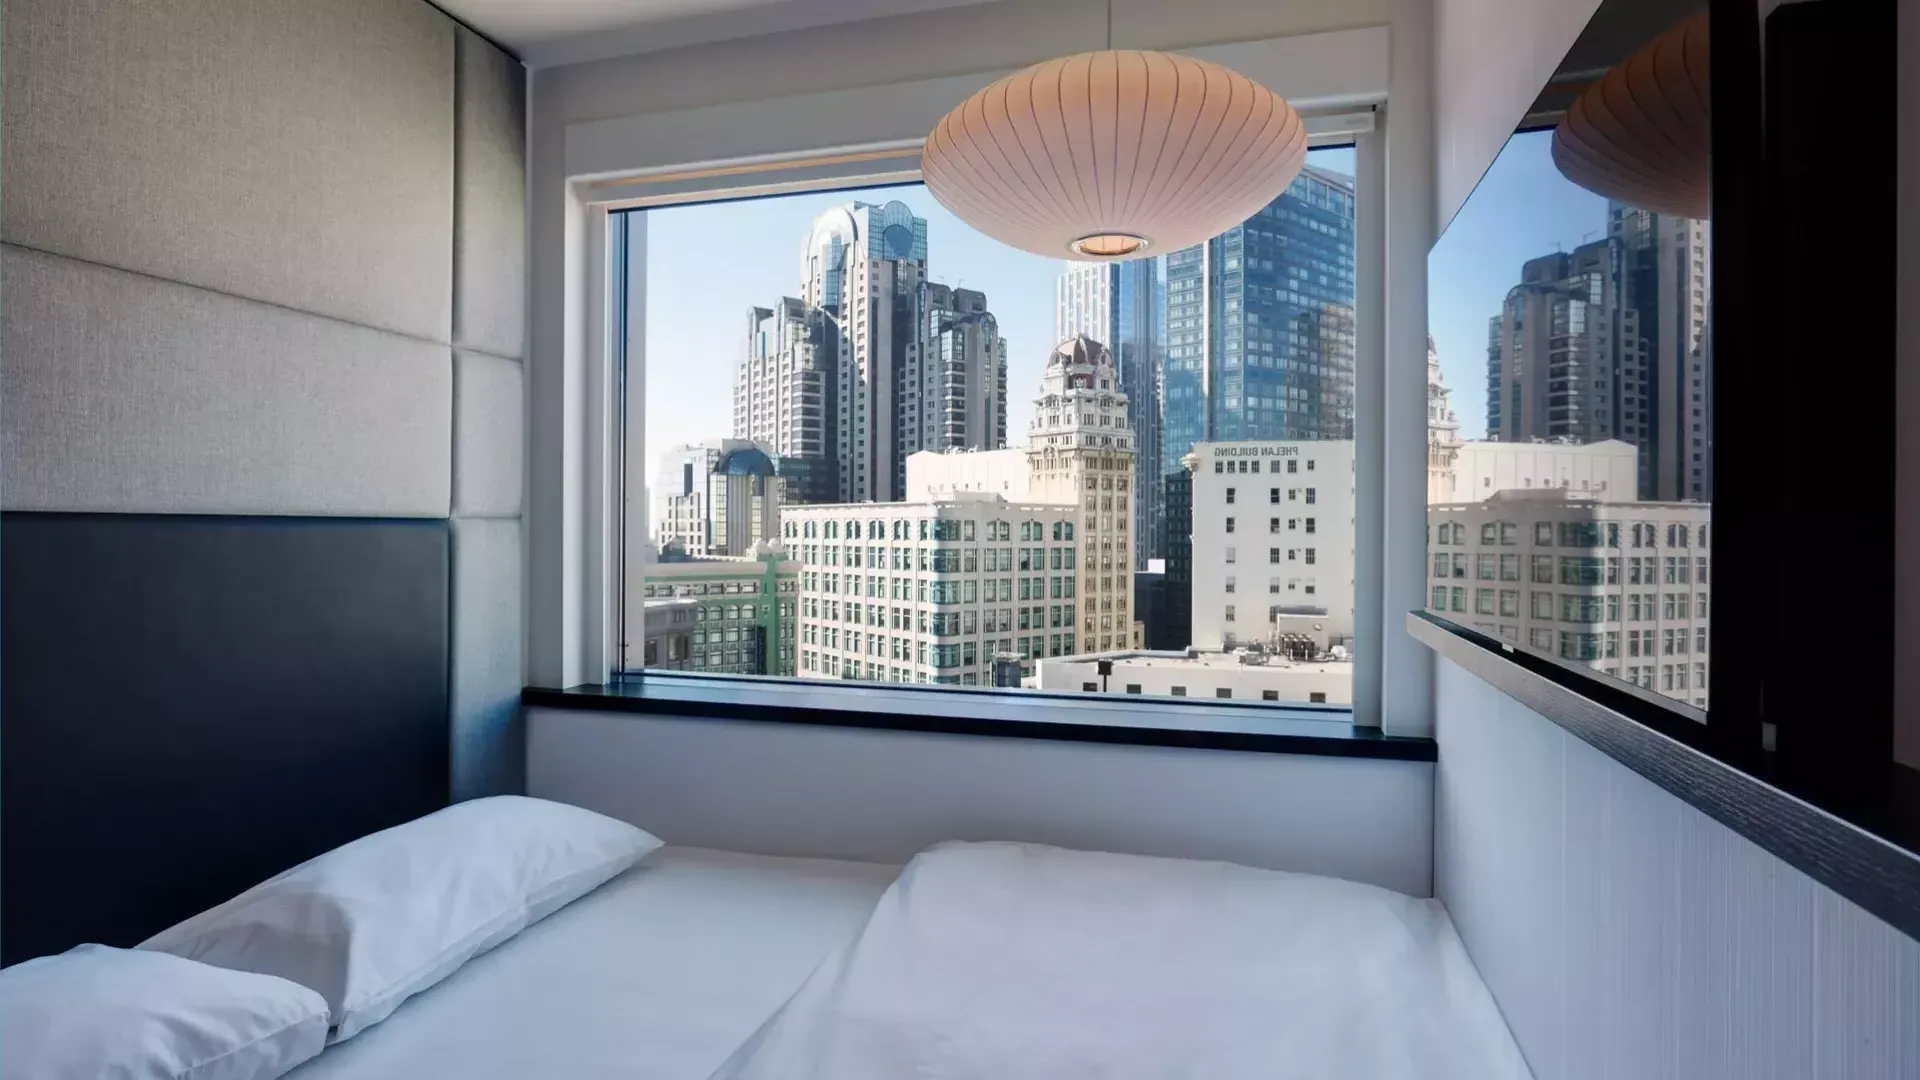 CitizenM hotel room with a view